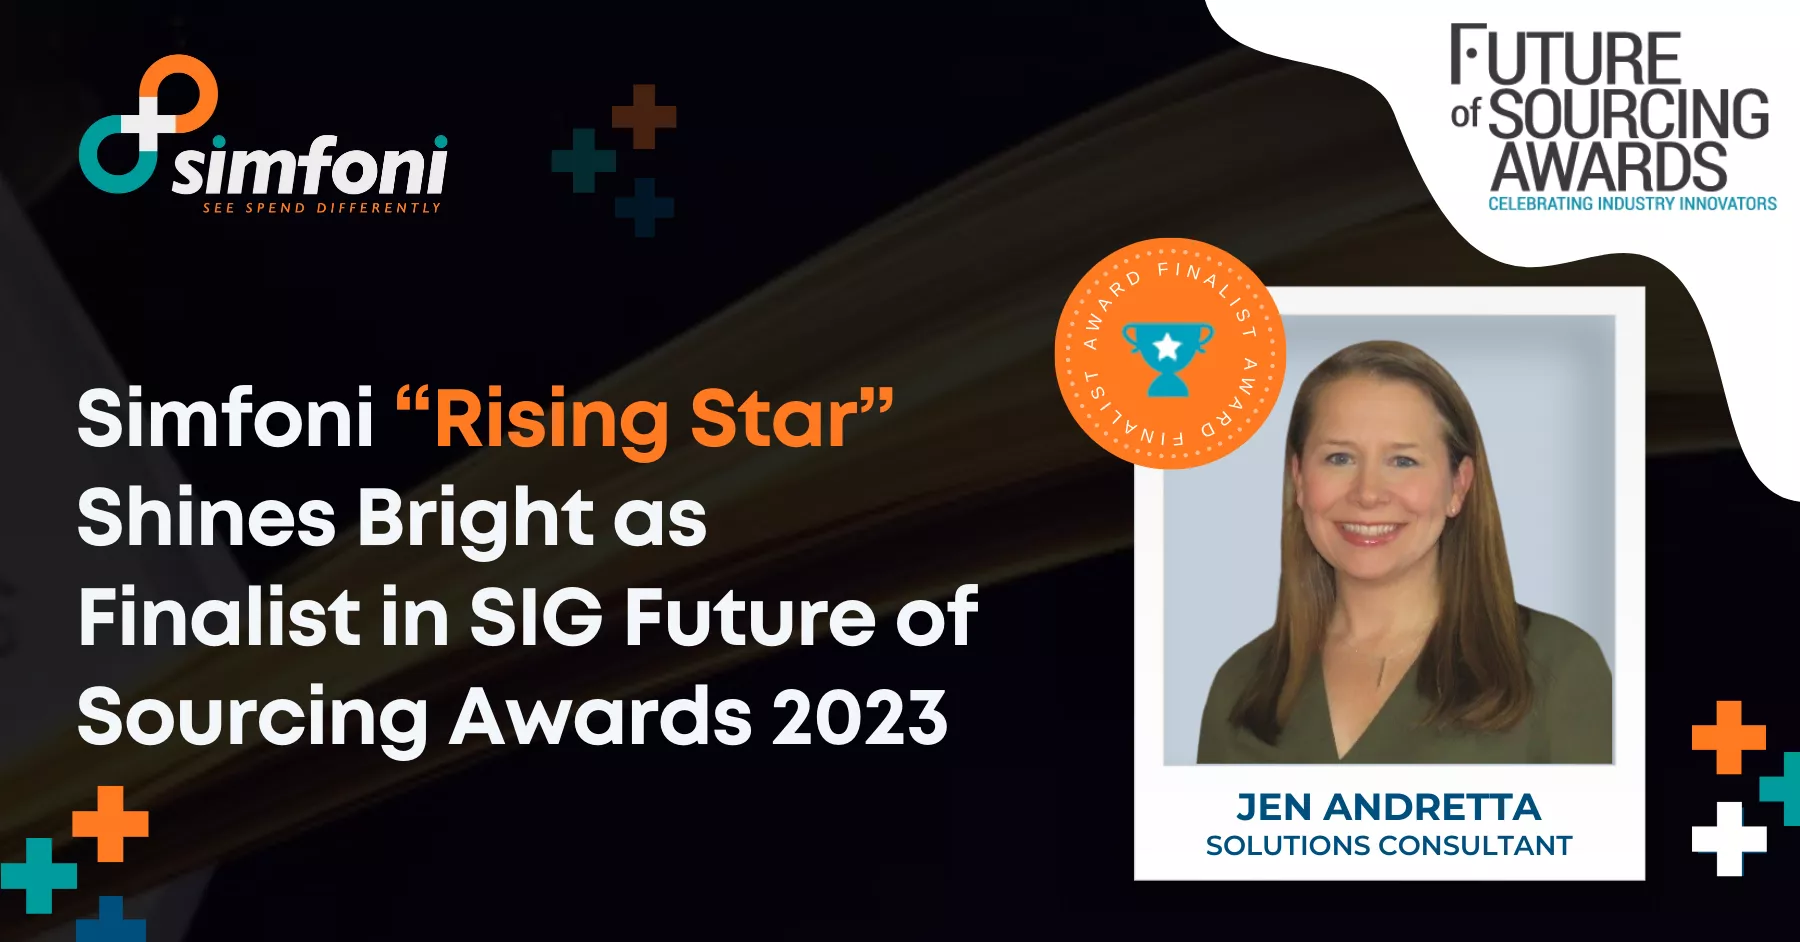 Simfoni “Rising Star” Shines Bright as Finalist in SIG Future of Sourcing Awards